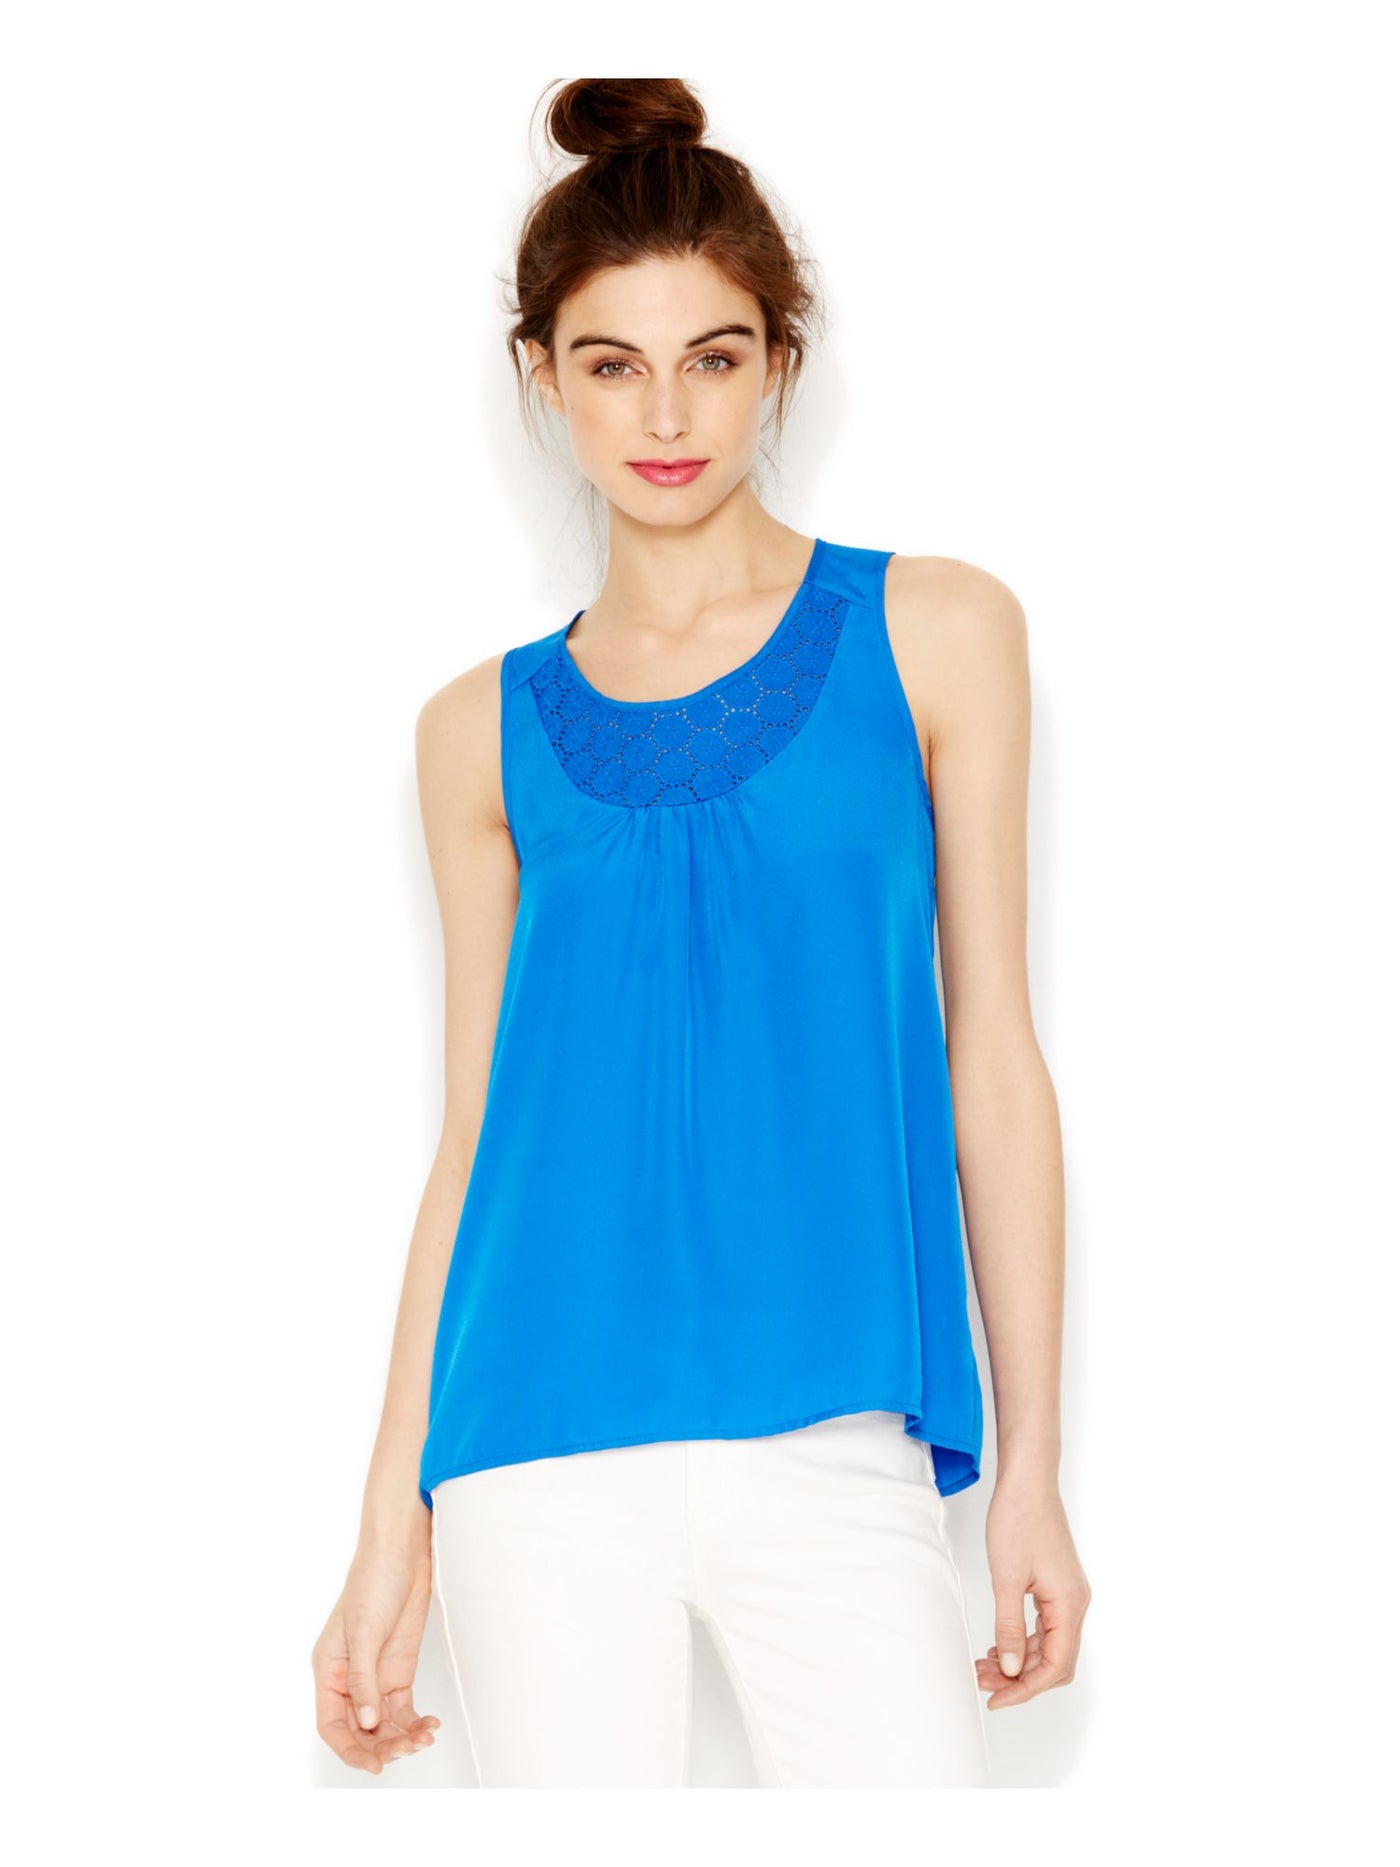 KENSIE Womens Blue Embellished Sleeveless Jewel Neck Top Size: S